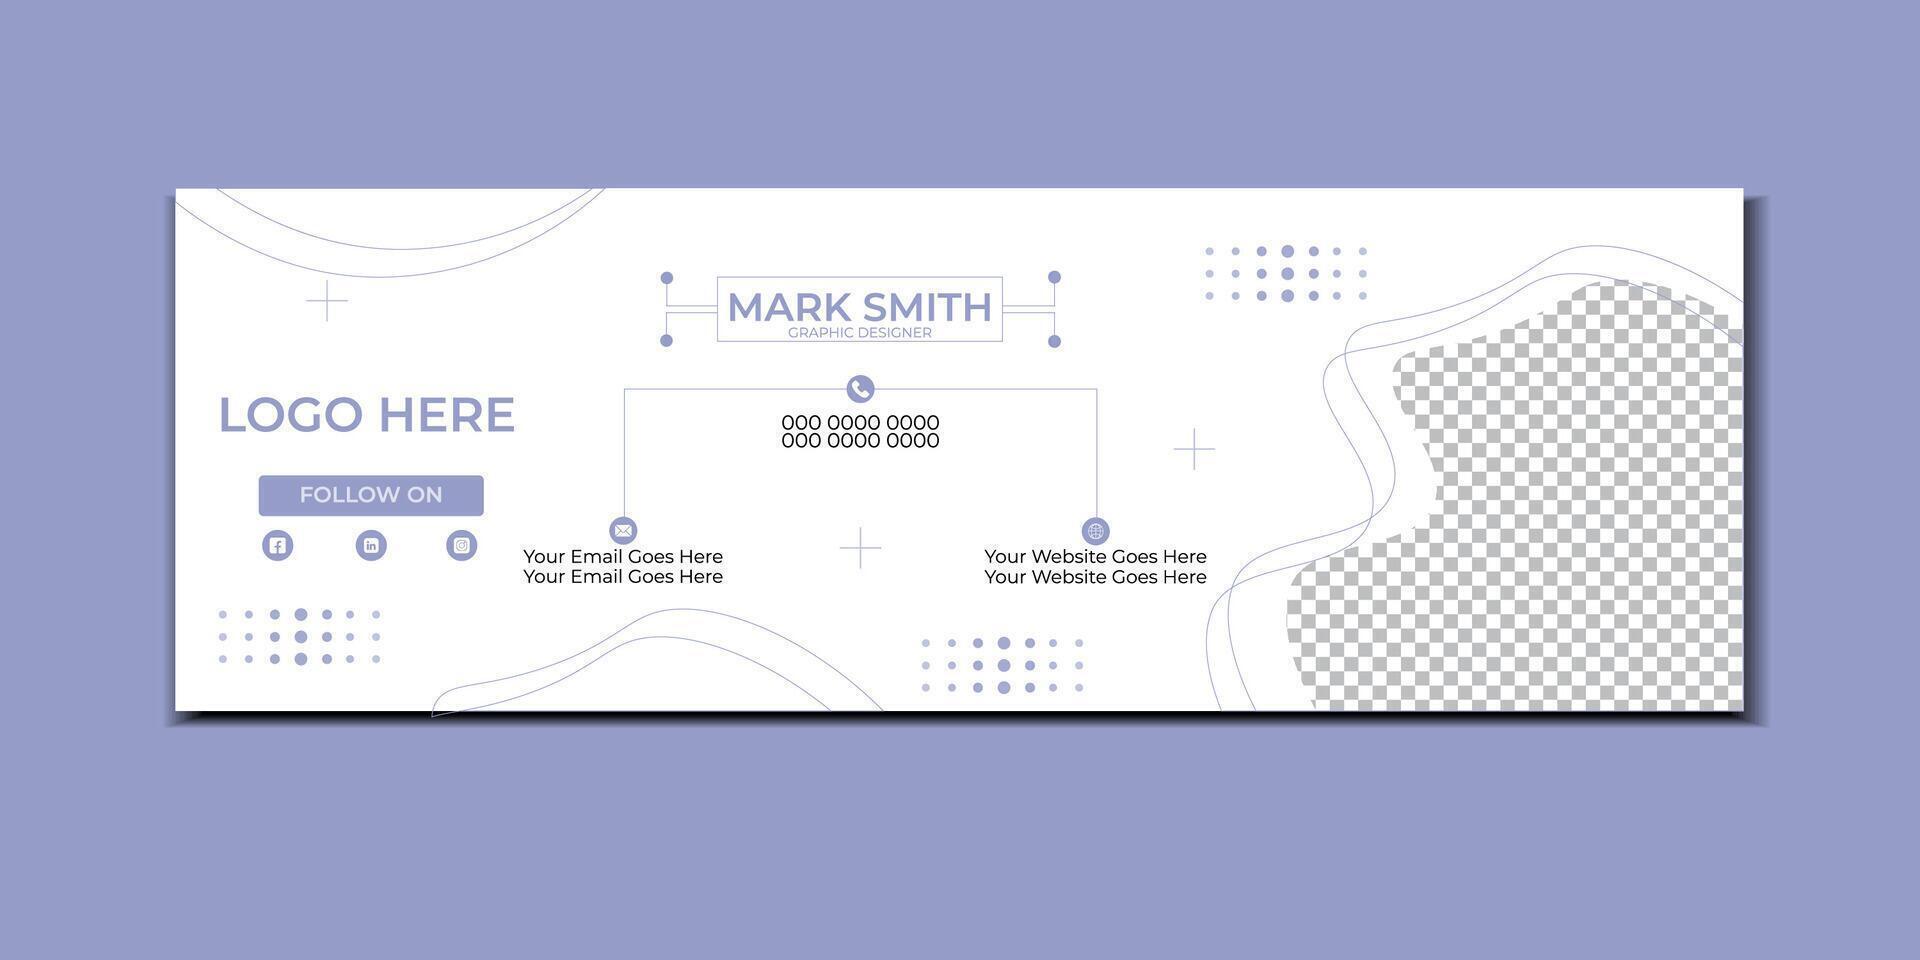 Email signature design vector and facebook cover template.